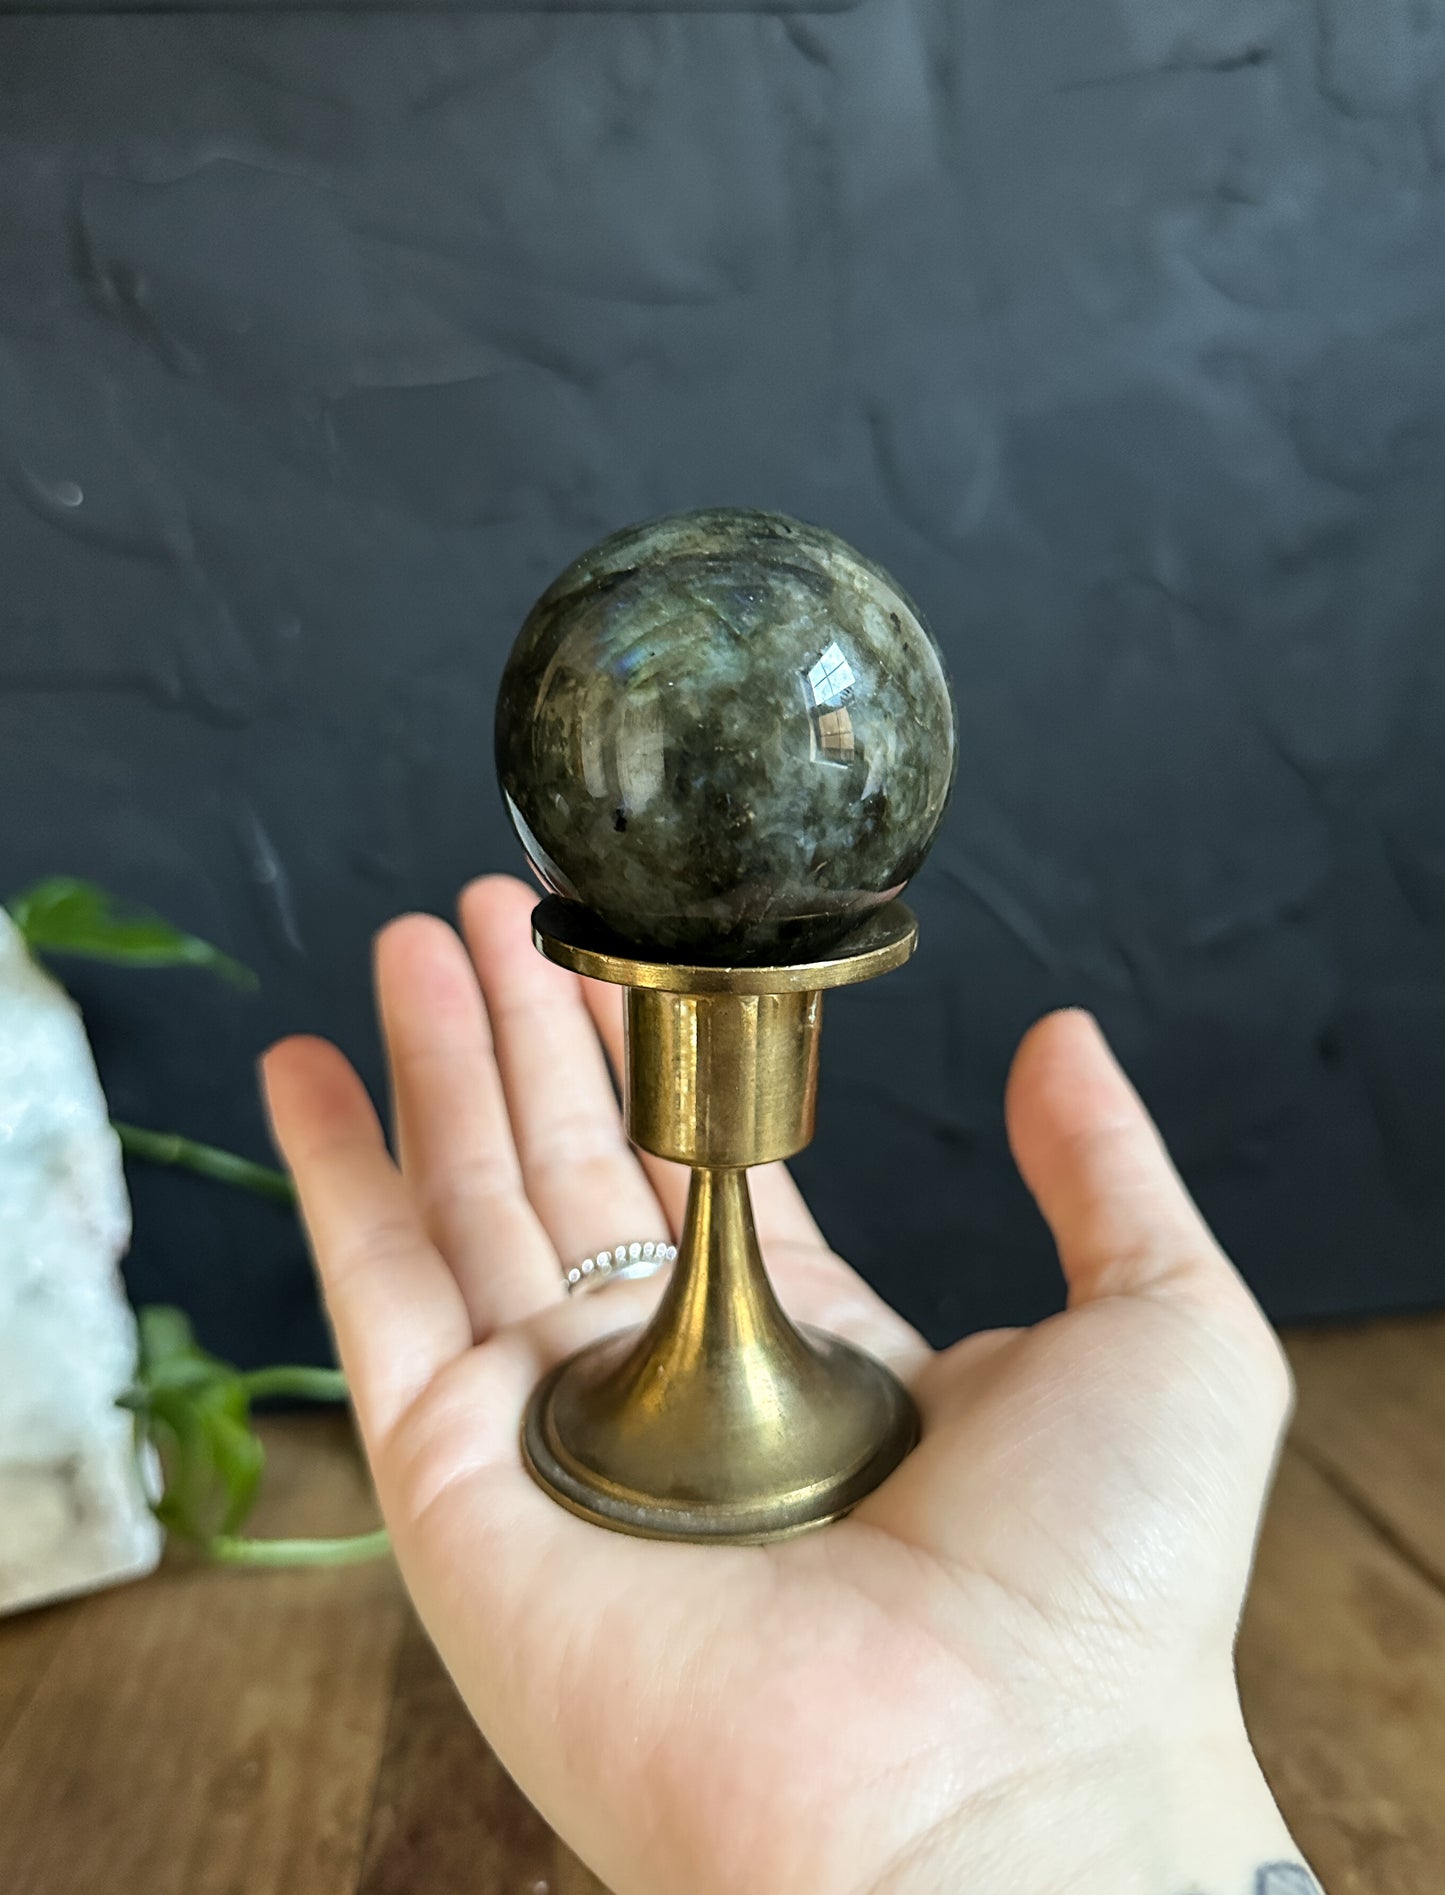 We thought this beautiful brass candle holder would be a perfect crystal ball stand!